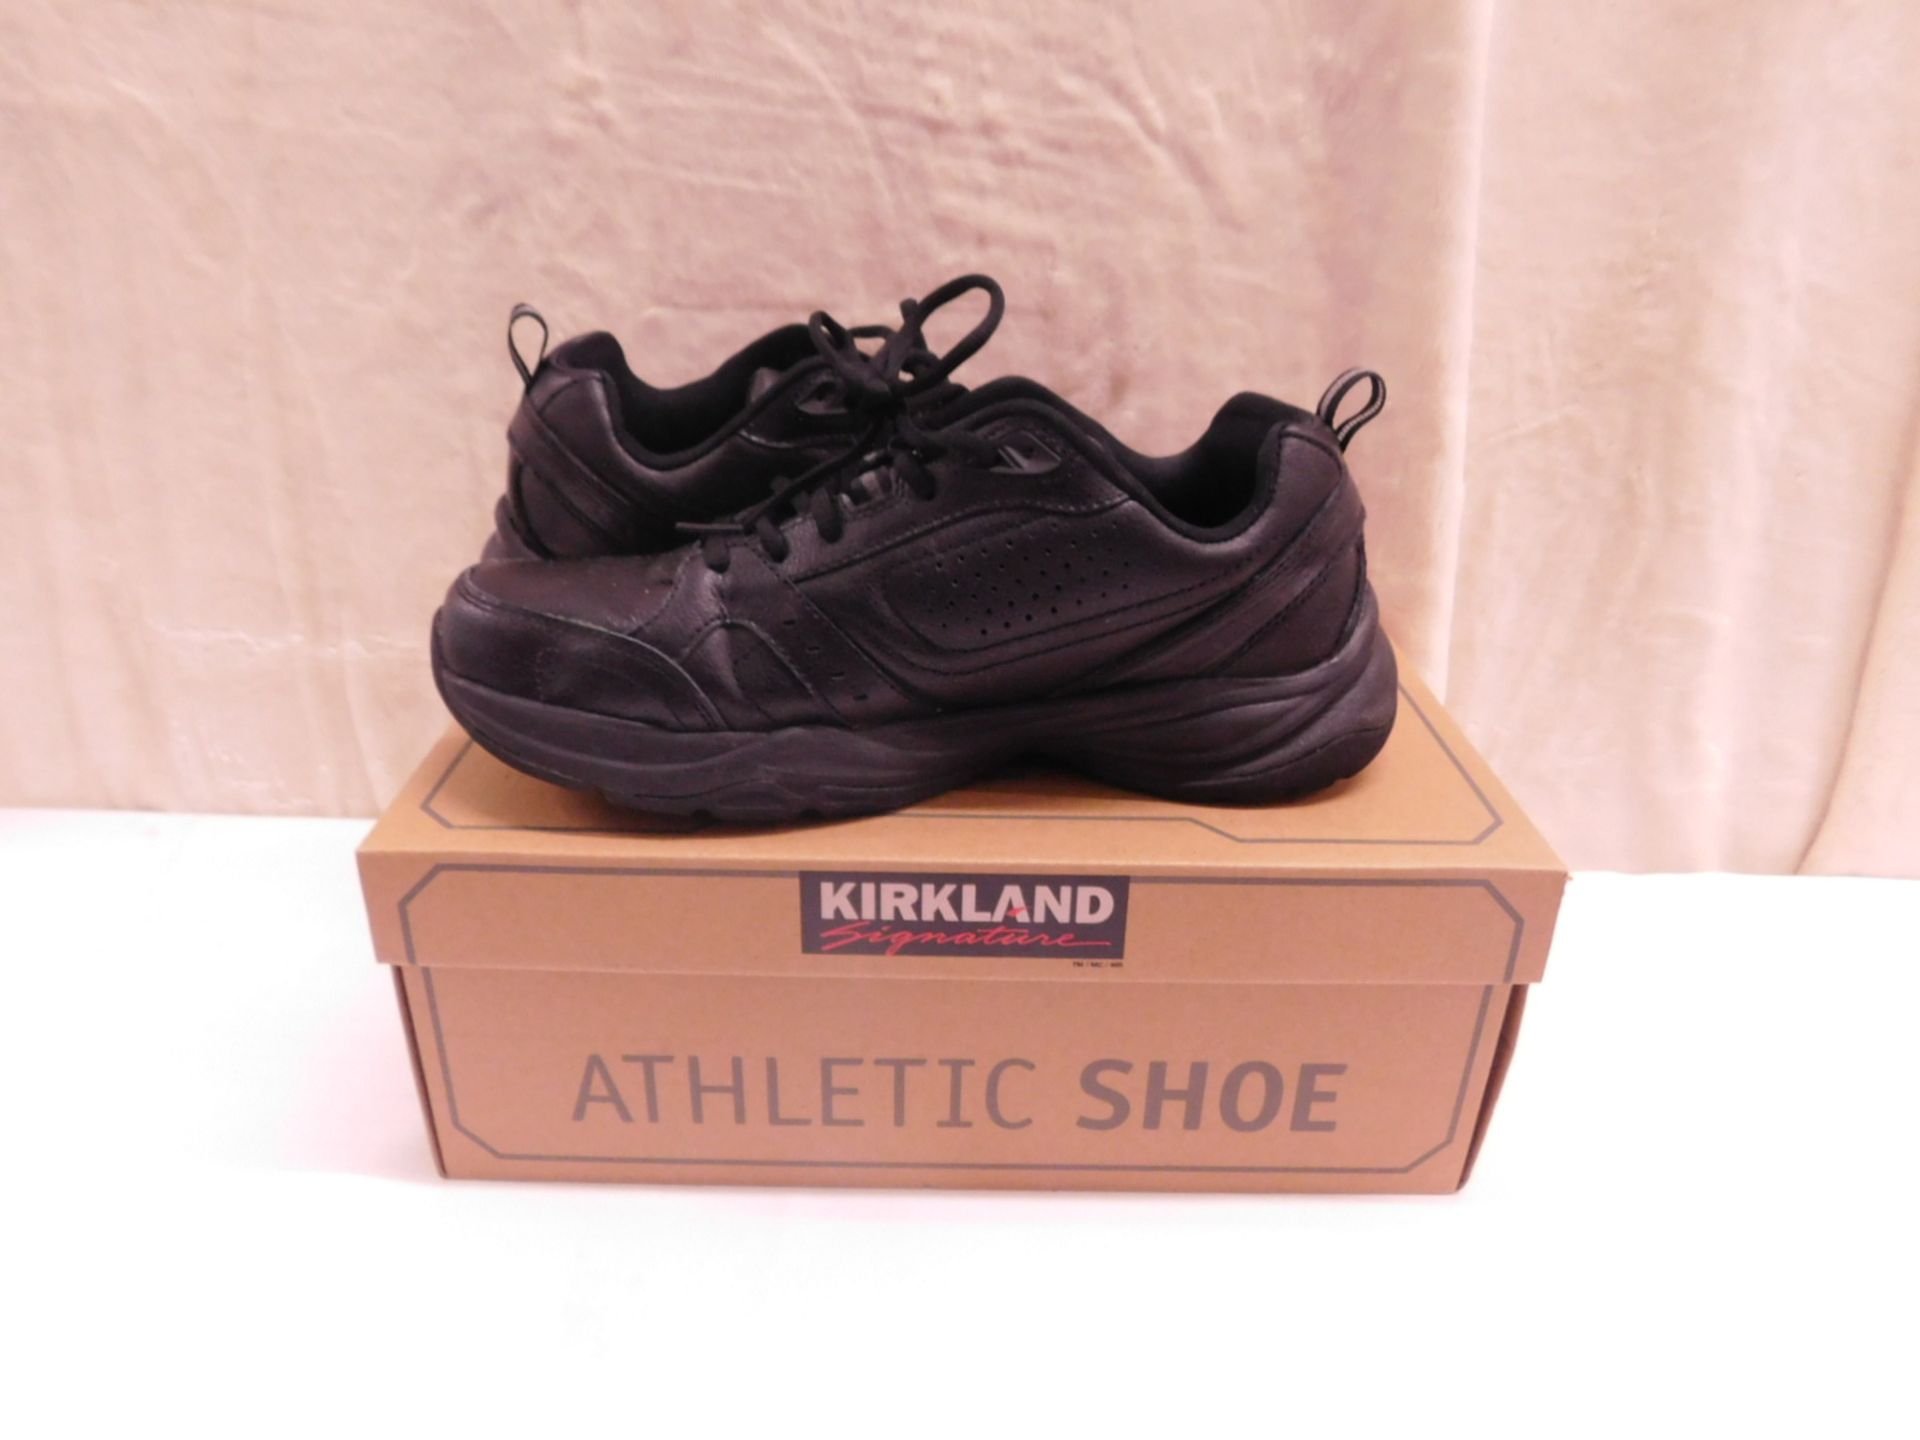 1 BOXED PAIR OF KIRKLAND SIGNATURE ATHLETIC SHOES UK SIZE 9.5 RRP £29.99